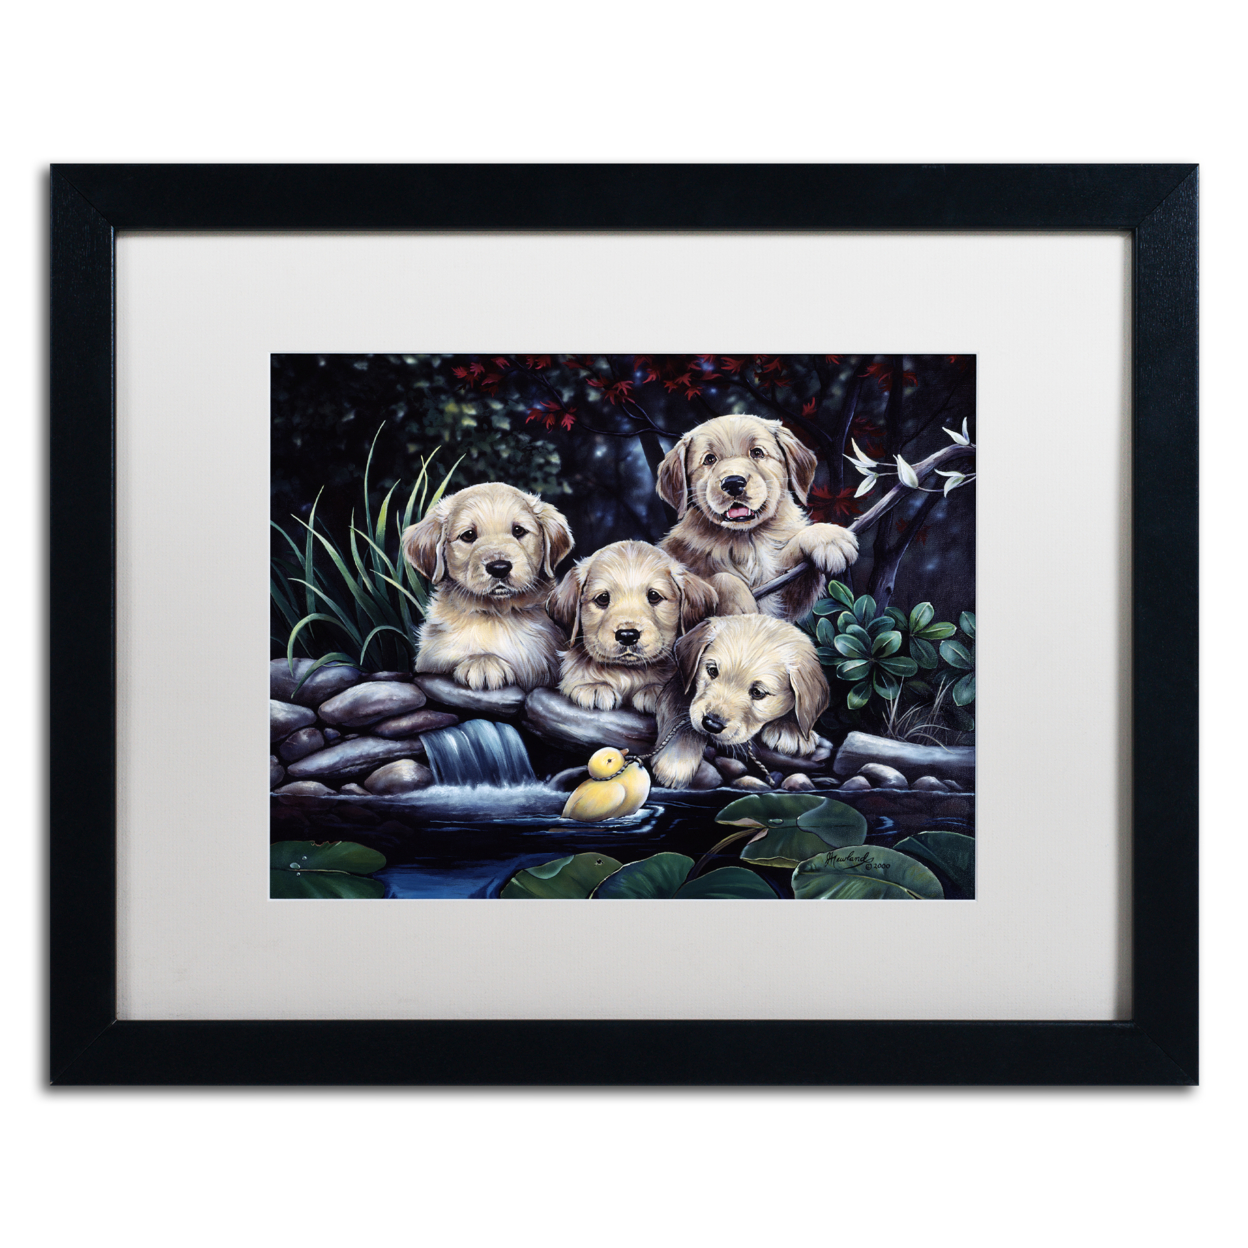 Jenny Newland 'Puppies To The Rescue' Black Wooden Framed Art 18 X 22 Inches